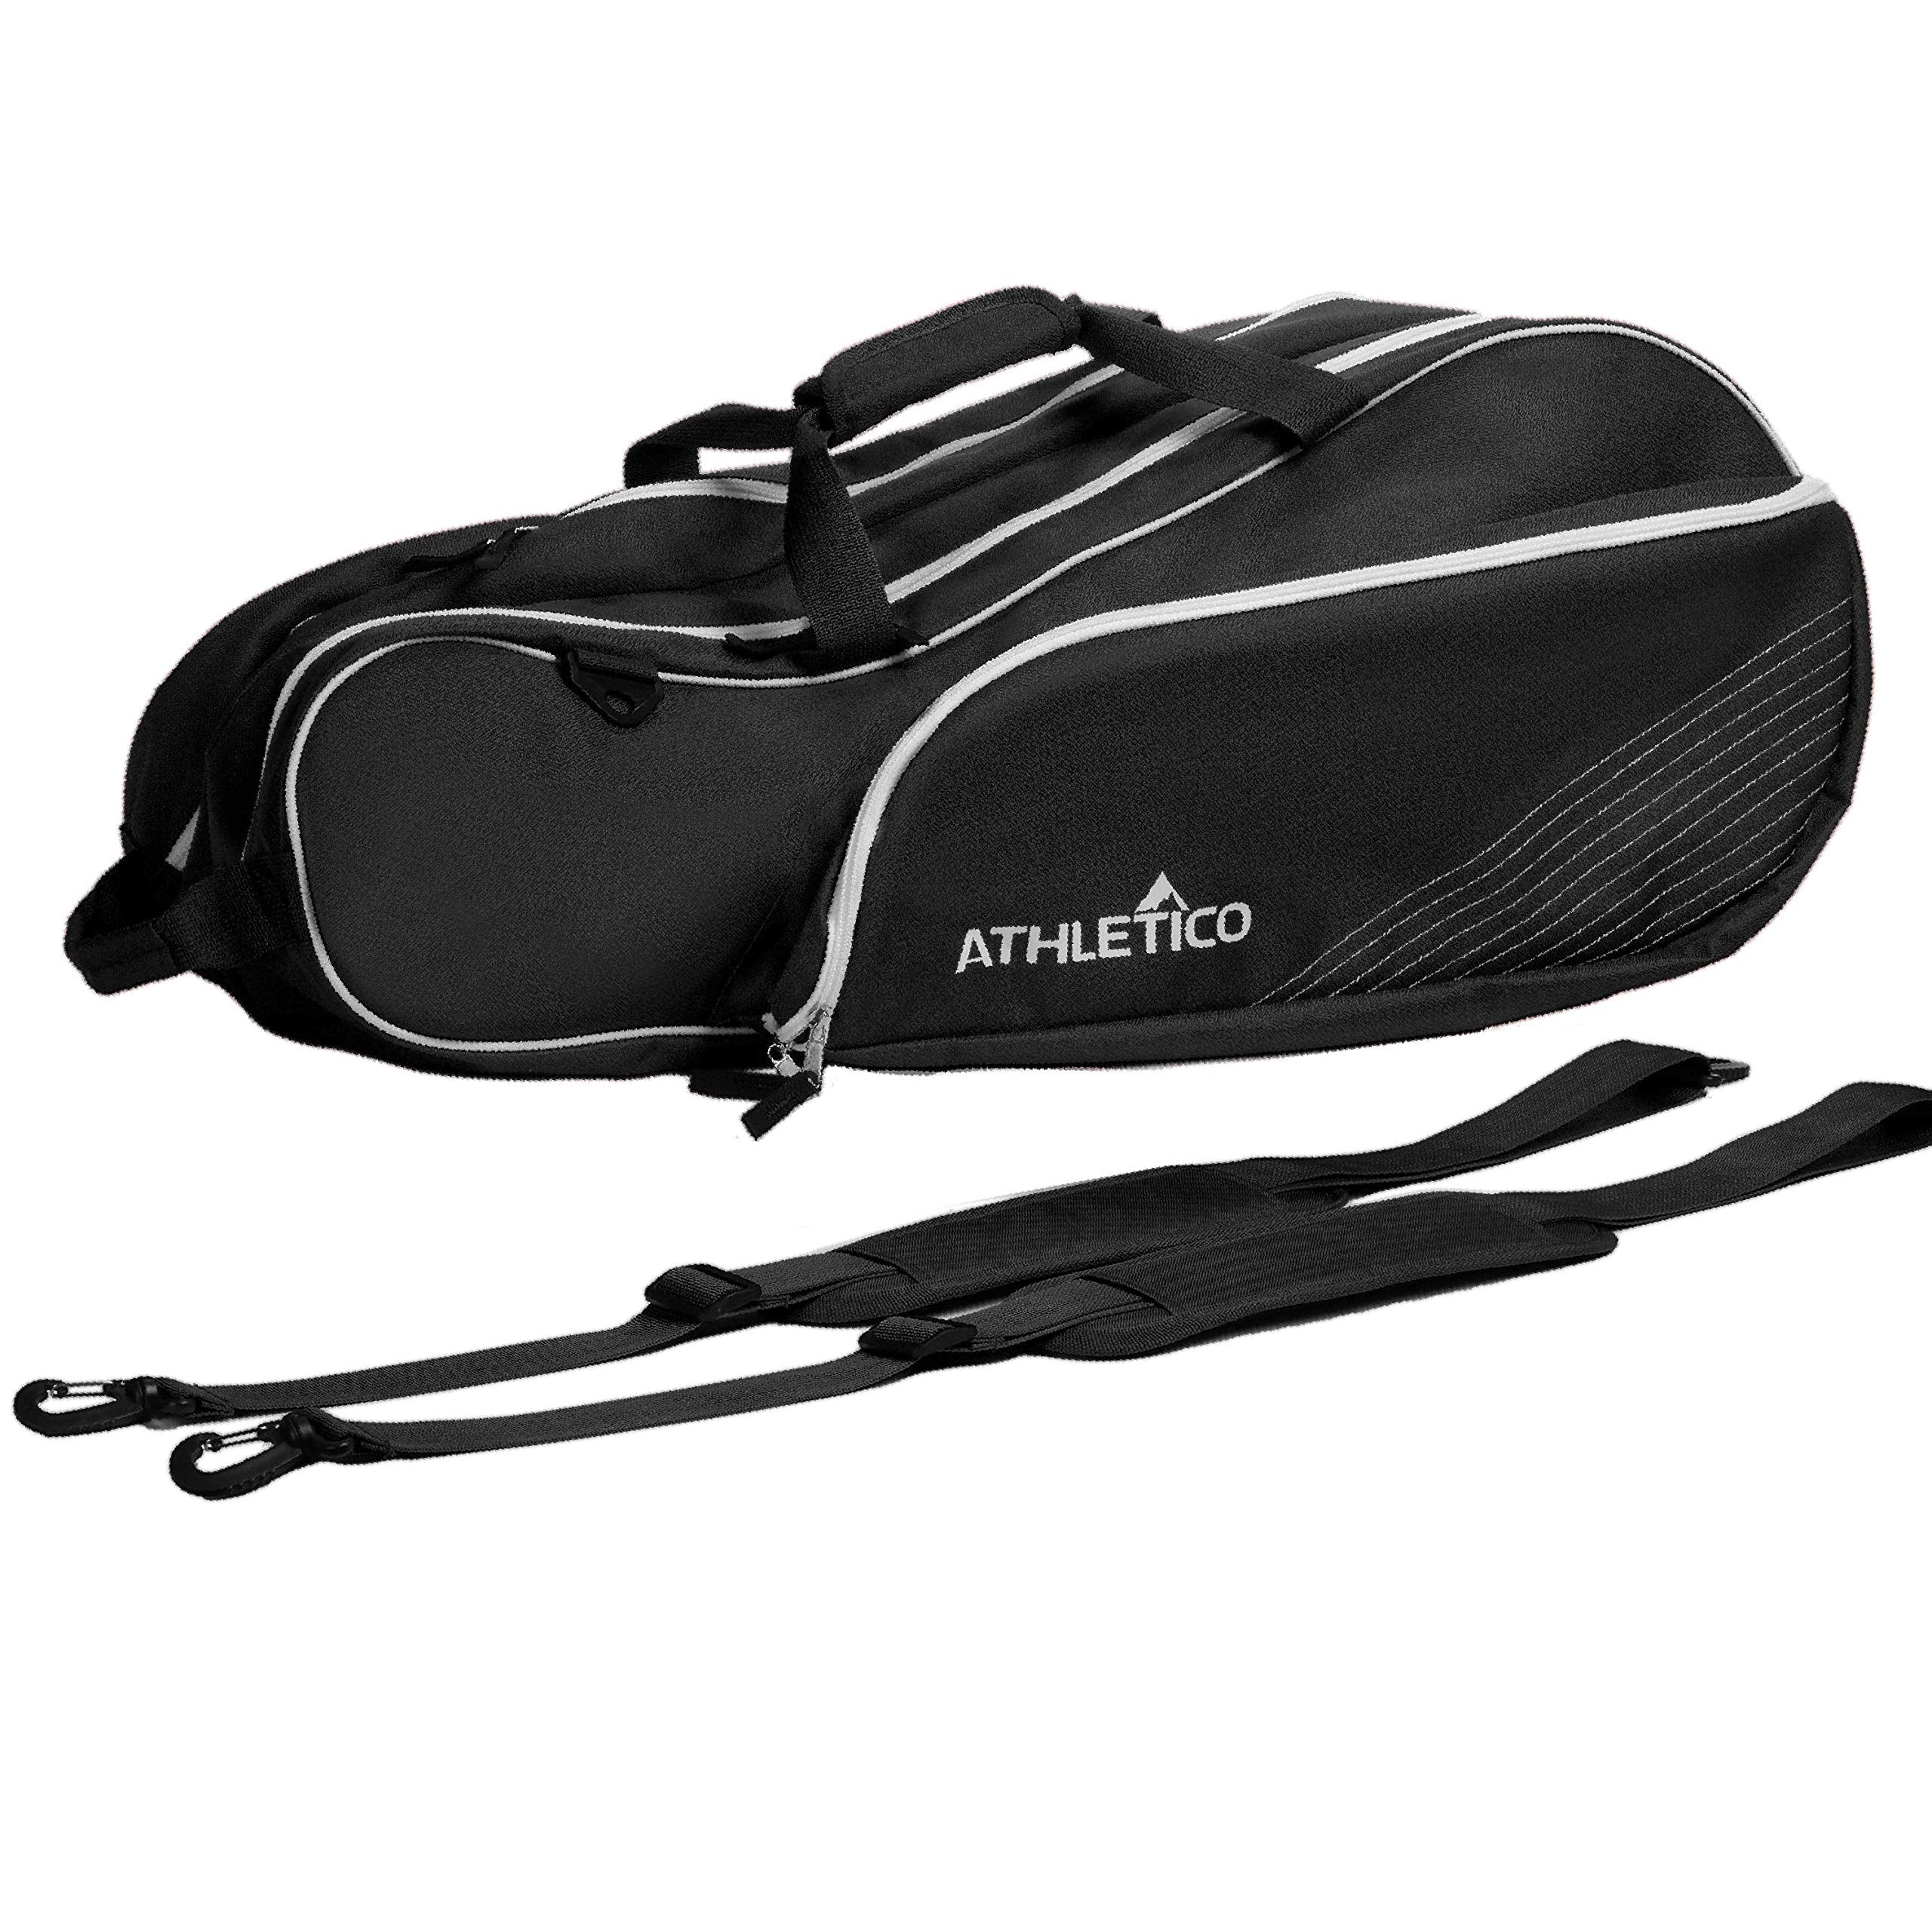 Athletico 6 Racquet Tennis Bag | Padded to Protect Rackets & Lightweight | Professional or Beginner Tennis Players | Unisex Design for Men, Women, Youth and Adults (Black)  - Acceptable